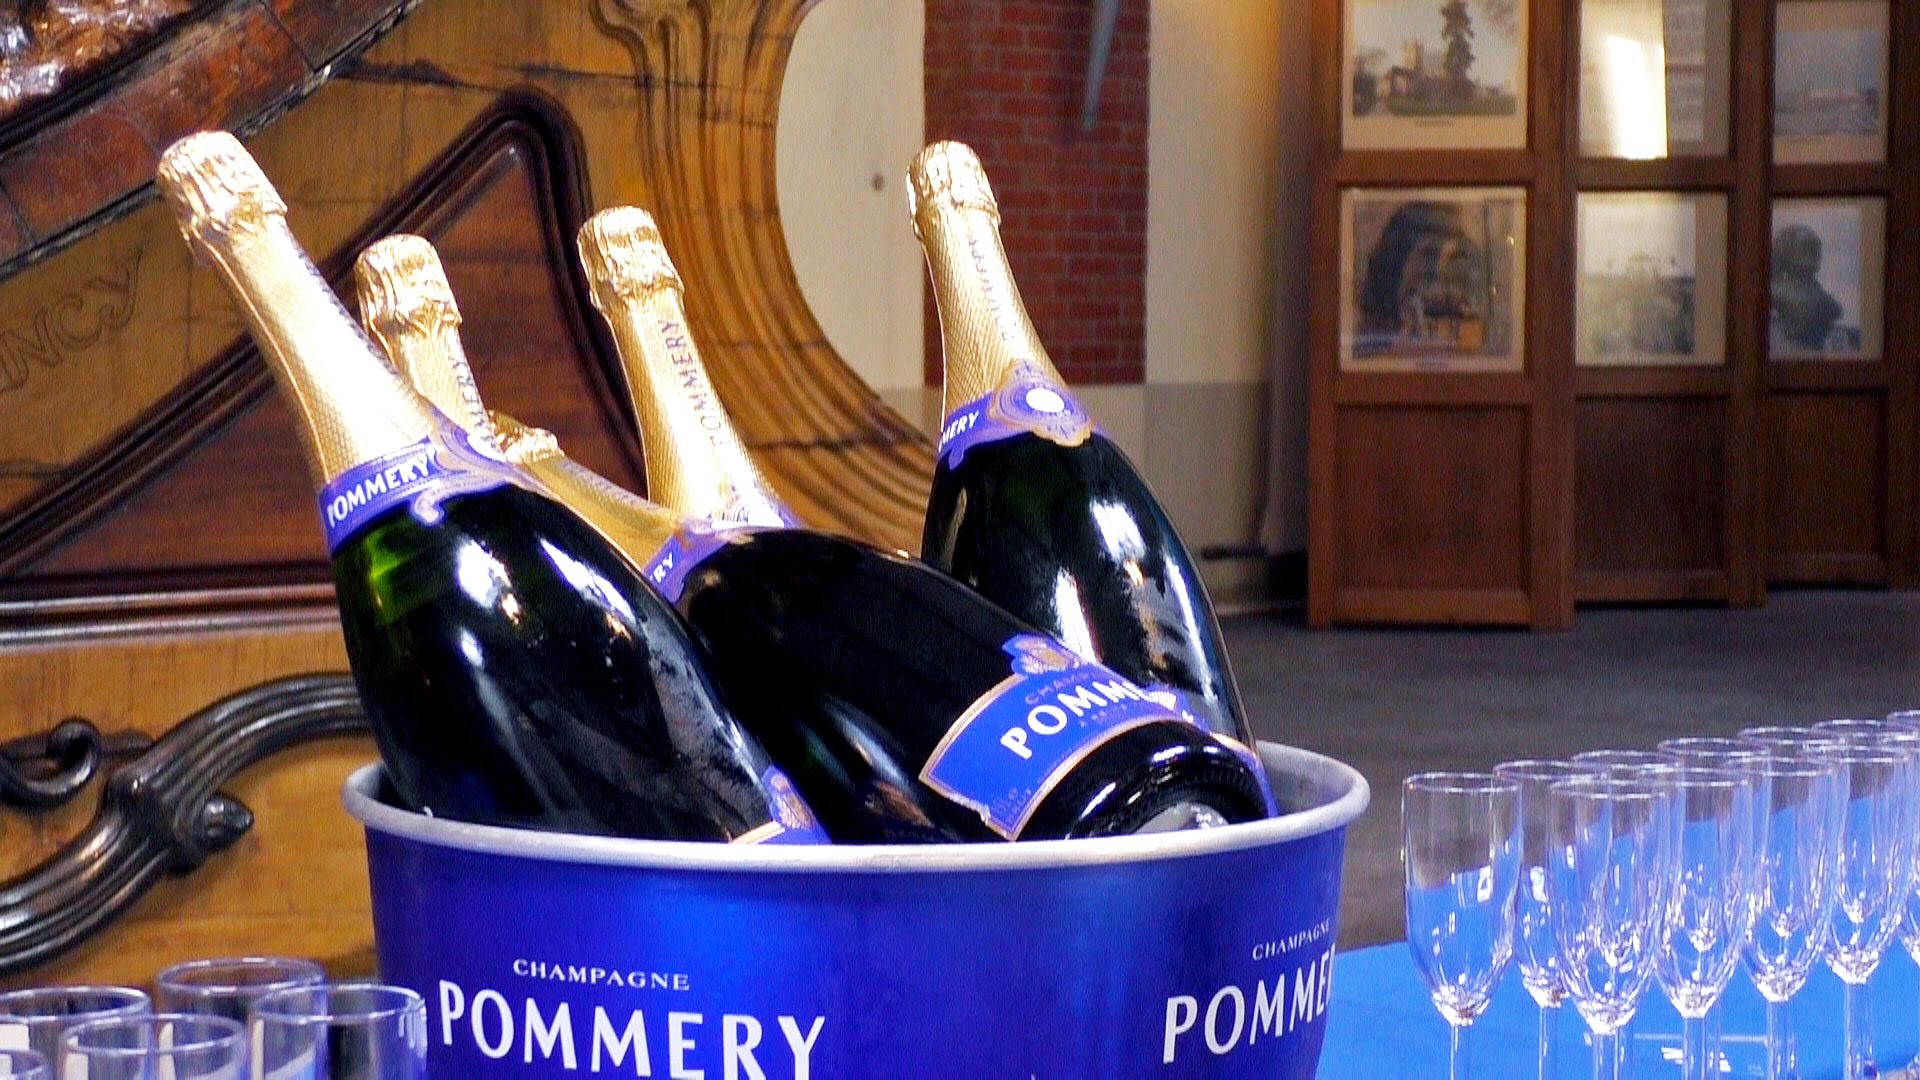 Madame POmmery: the Story of a Trailblazing Woman